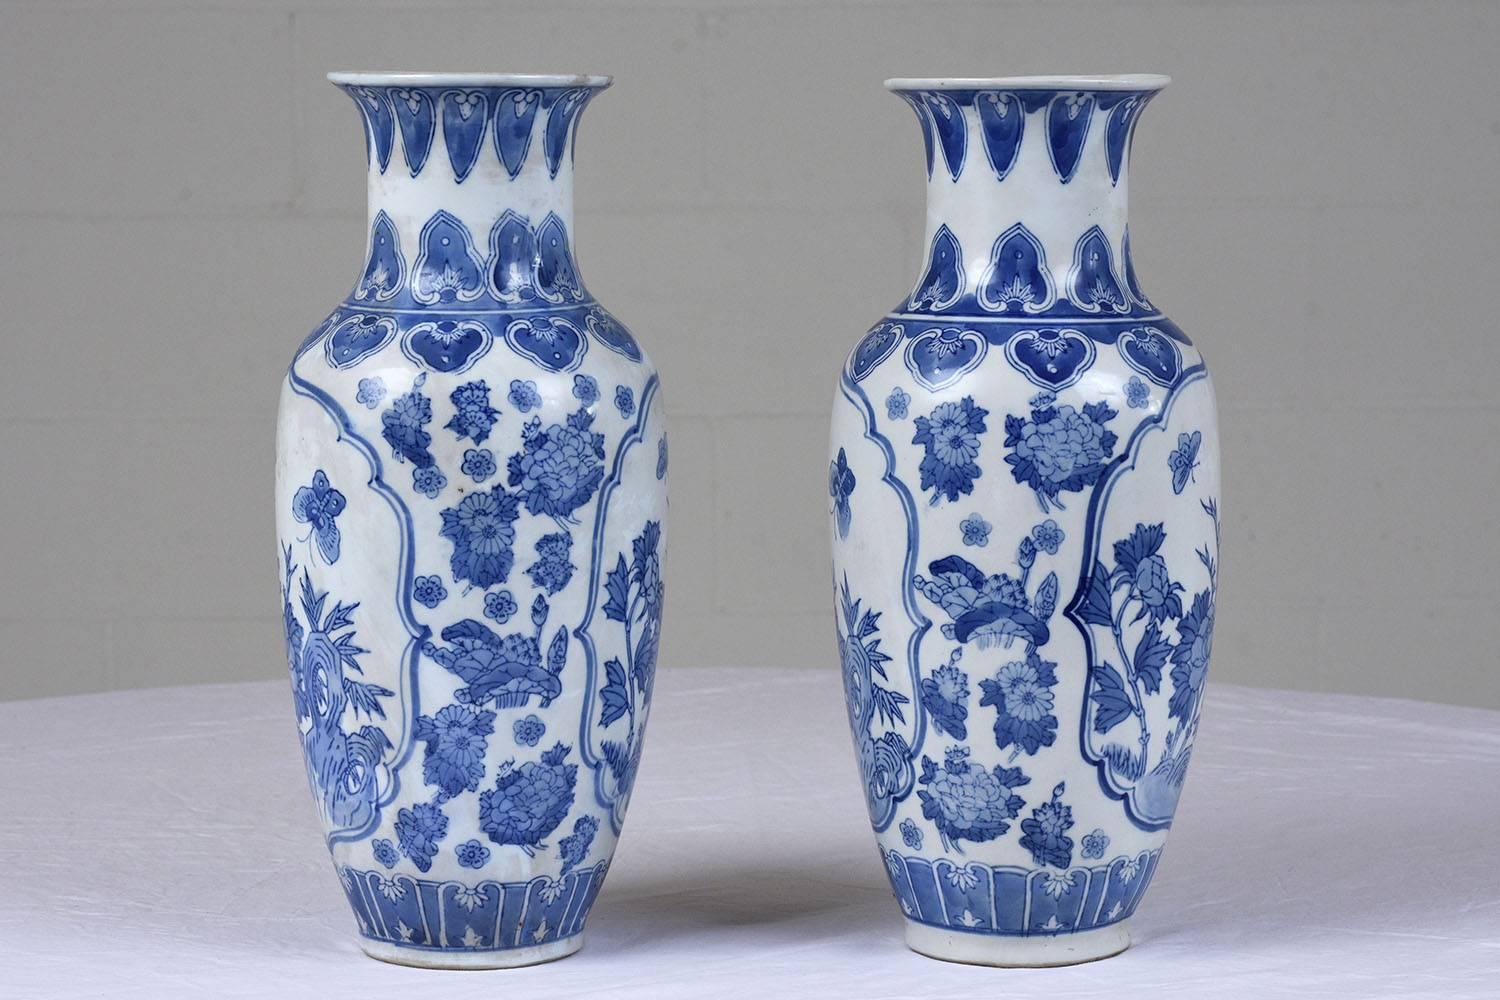 This pair of 1910s Chinese vases are made of ceramic and feature blue and white designs. The vases depict a garden scene with butterflies flying. The vases have floral and leaf motif bands that adorn the lip and bottom. The vases are stamped on the